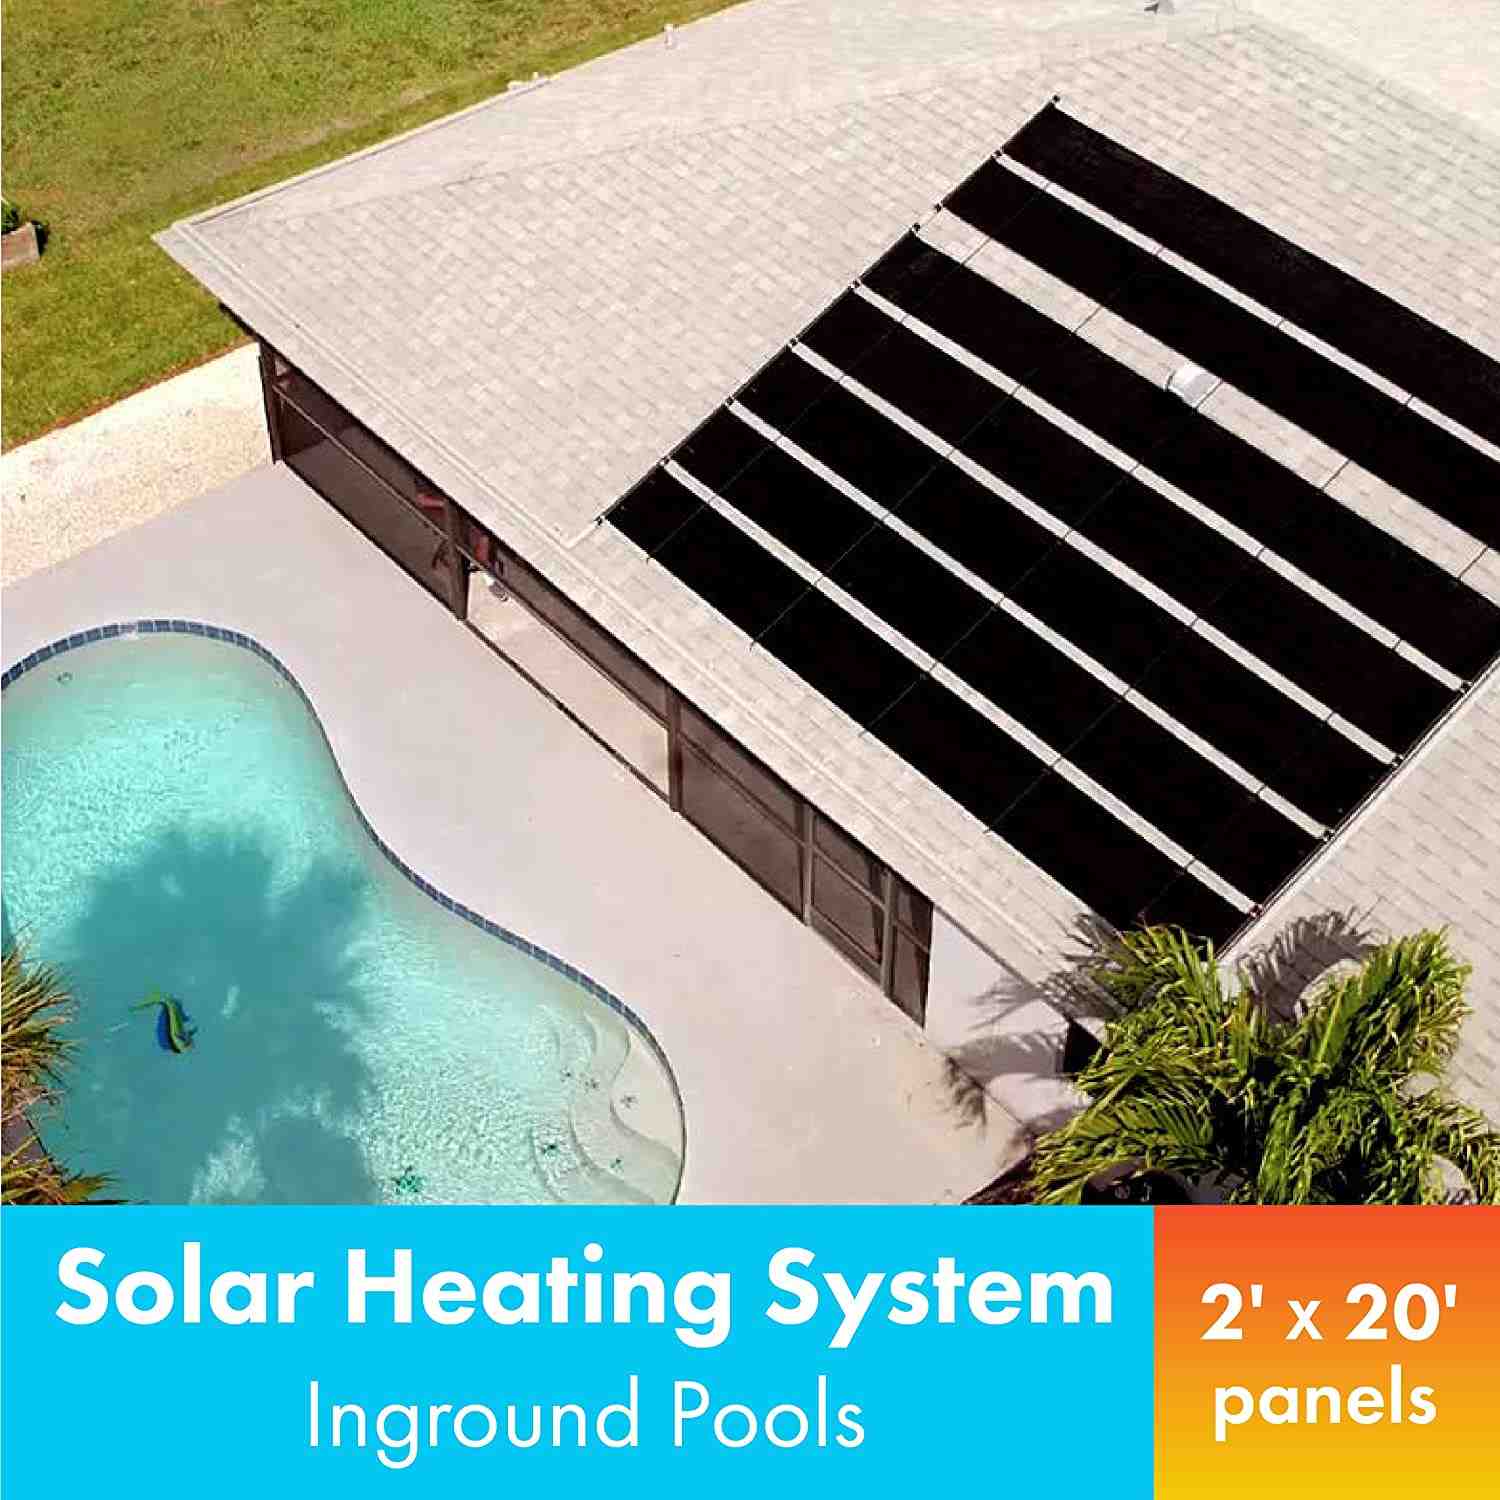 How much do solar panels for swimming pools cost?